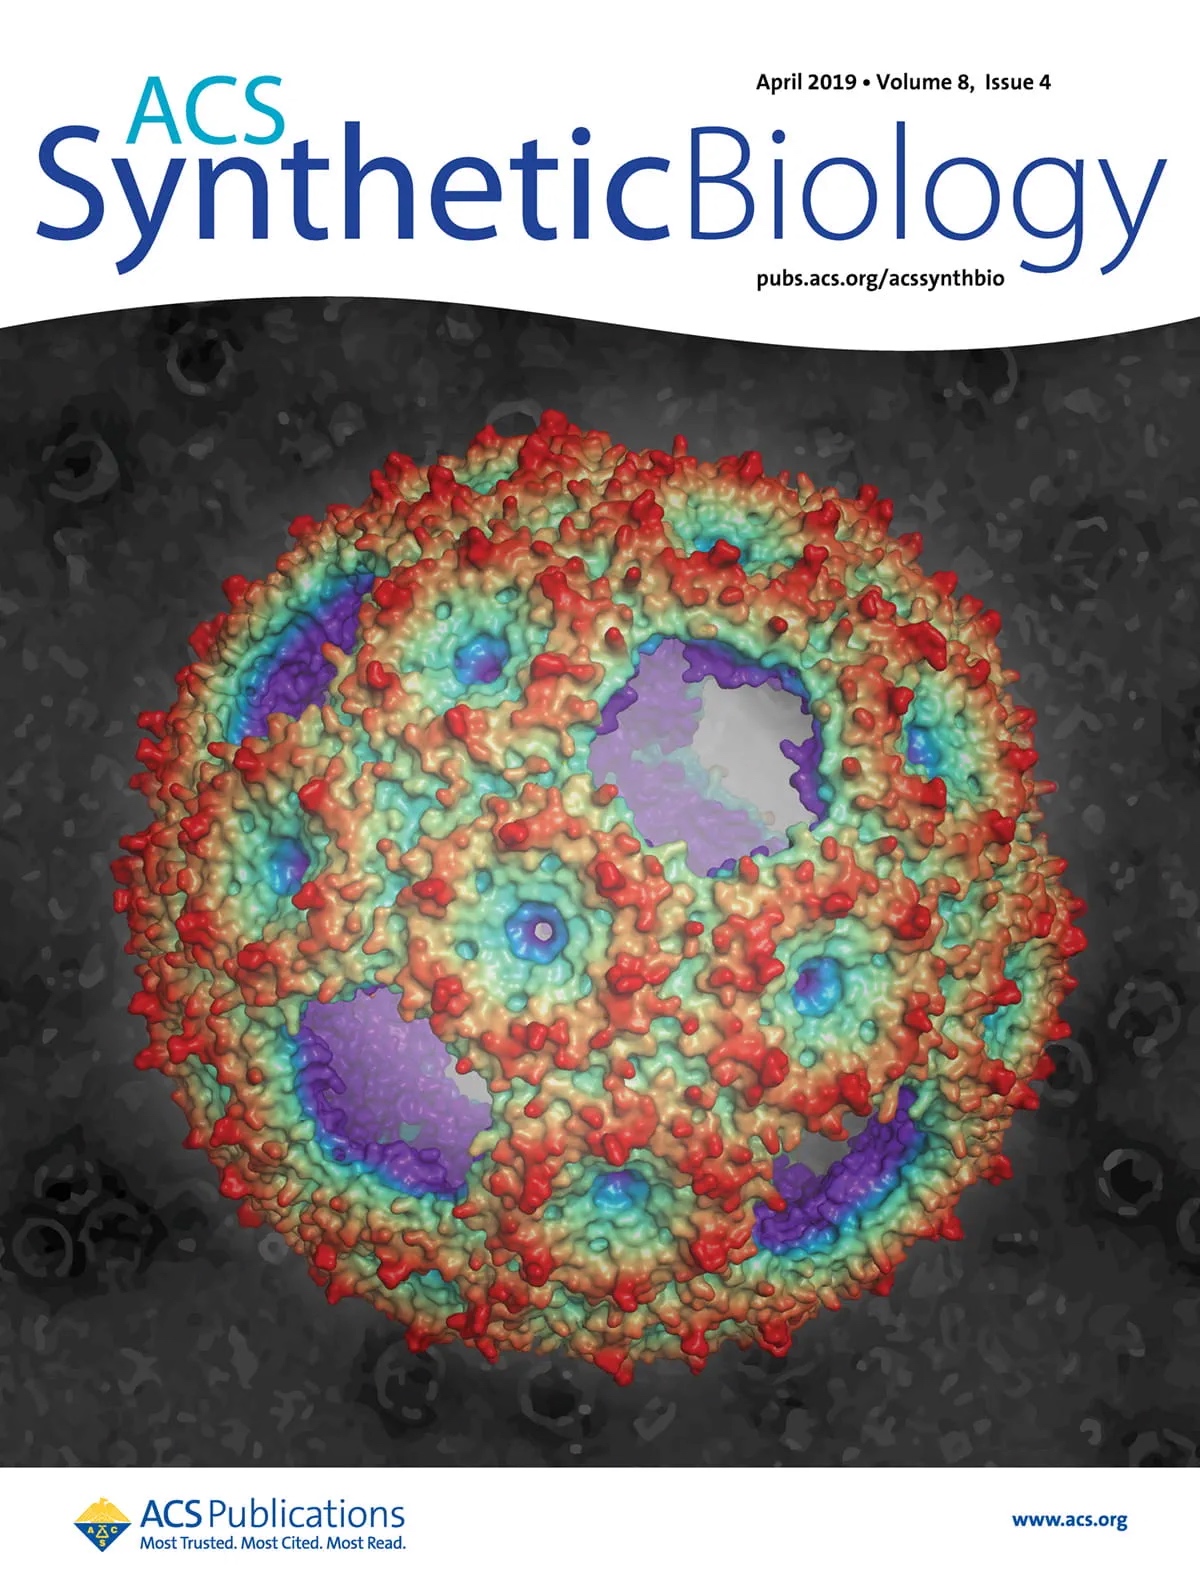 Michigan State University’s Cheryl Kerfeld and her colleagues have been instrumental in revealing the form and function of bacterial microcompartments. Cover art for a 2019 issue of the journal ACS Synthetic Biology features some of their work, showing a rendering of the protein shell of a synthetic compartment. Reprinted with permission from ACS Synth. Biol. 2019, 8, 4. Copyright 2019 American Chemical Society.